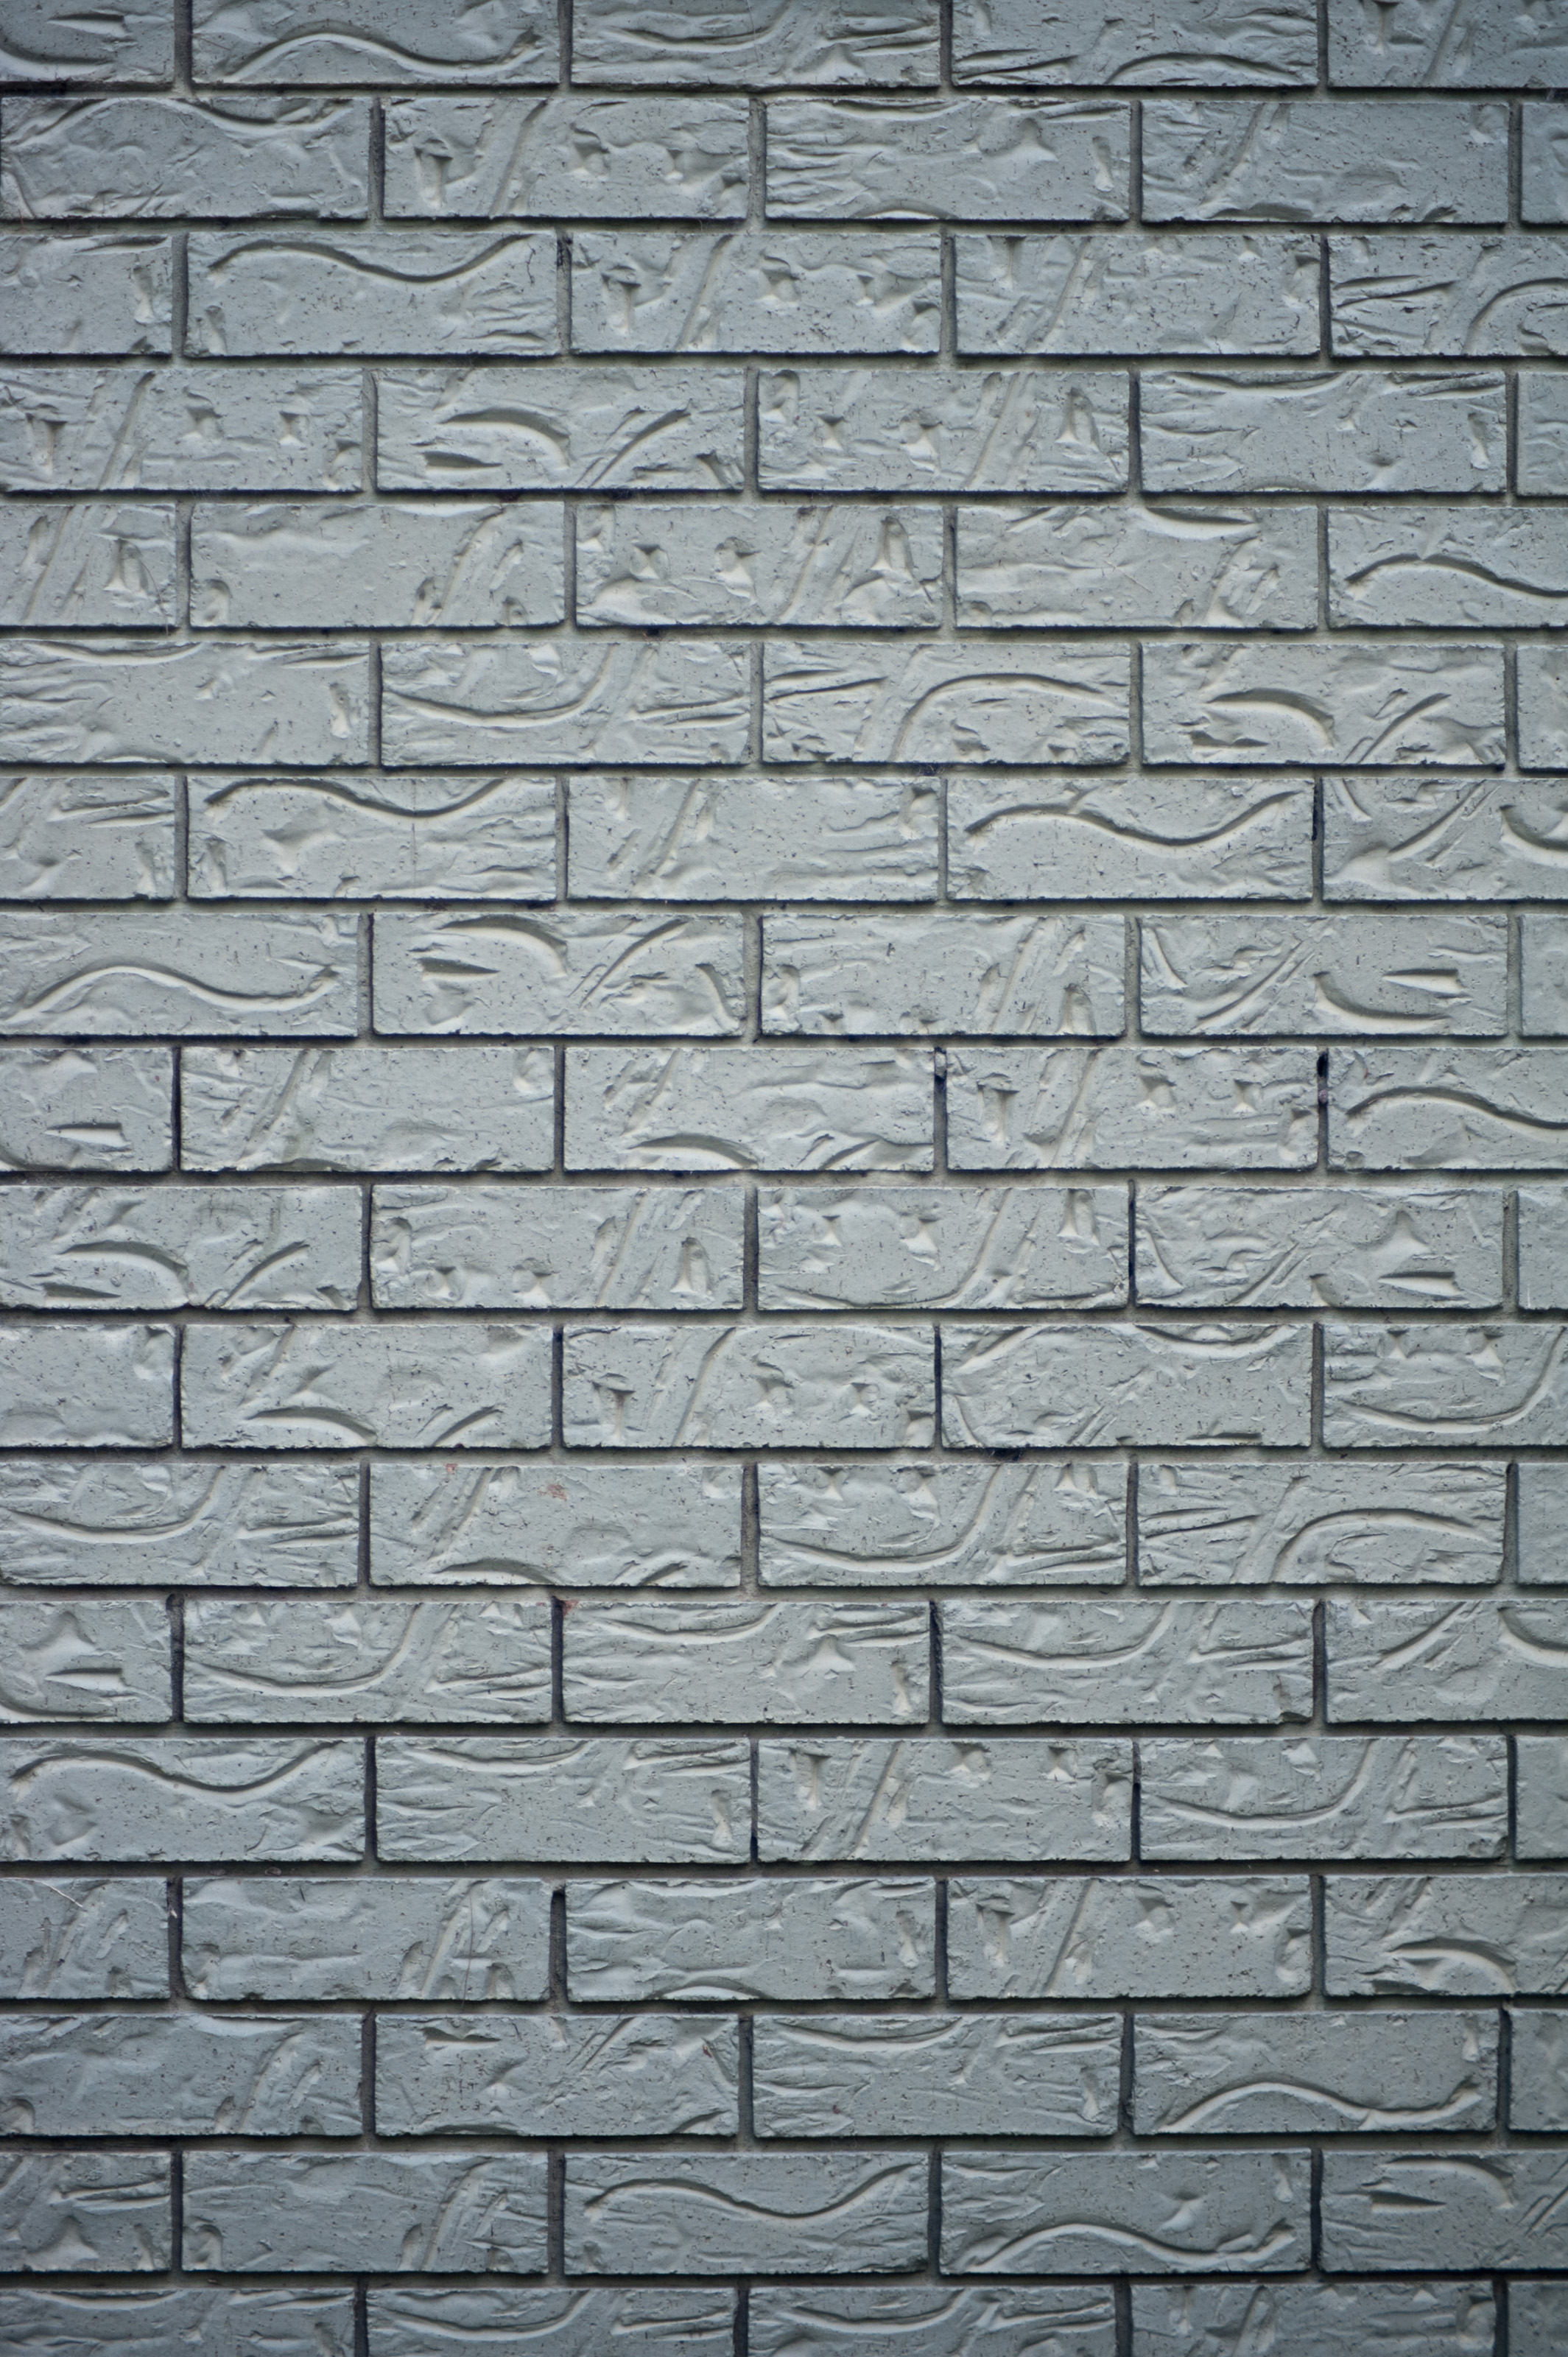 Free Stock Photo 10907 Background texture of a grey brick wall |  freeimageslive